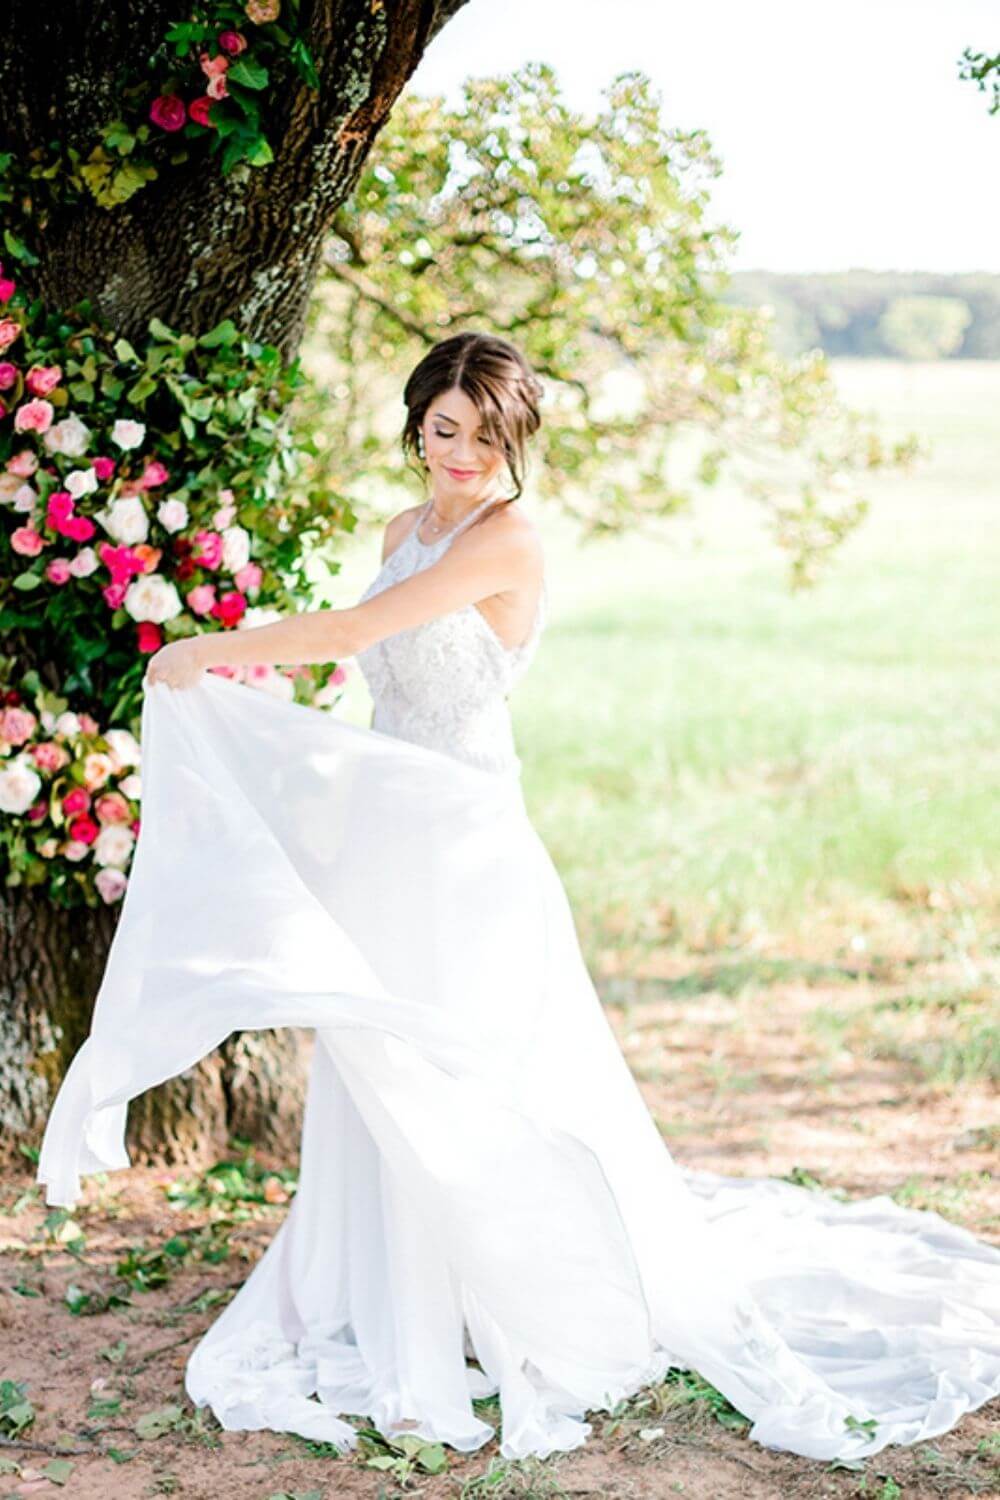 Bride in an A-line Wedding Dress photo by Elizabeth Couch Photography